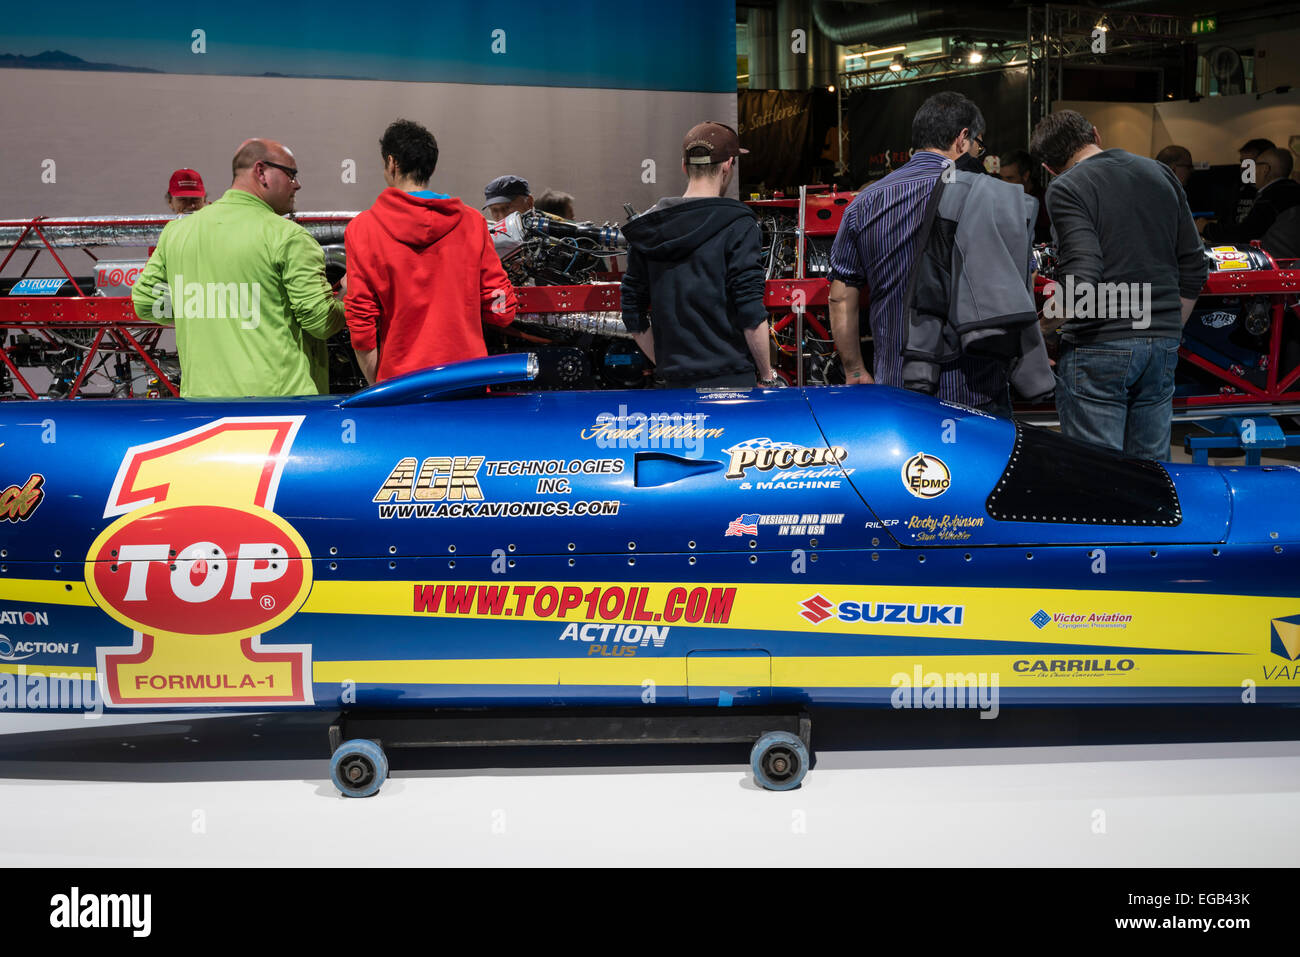 Zurich, Switzerland. 20th February, 2015. Visitors of Switzerland's largest motorcycle show 'Swiss-Moto' in Zurich gather around 'Ack Attack', the world's fastest motorcycle (fairing in the front, chassis in the back). The streamliner motorcycle is powered by two Suzuki Hayabusa engines, has more than 1000hp and reached 605.7 km/hour (376.4 mph) at Bonneville - current world record. Credit:  thamerpic/Alamy Live News Stock Photo